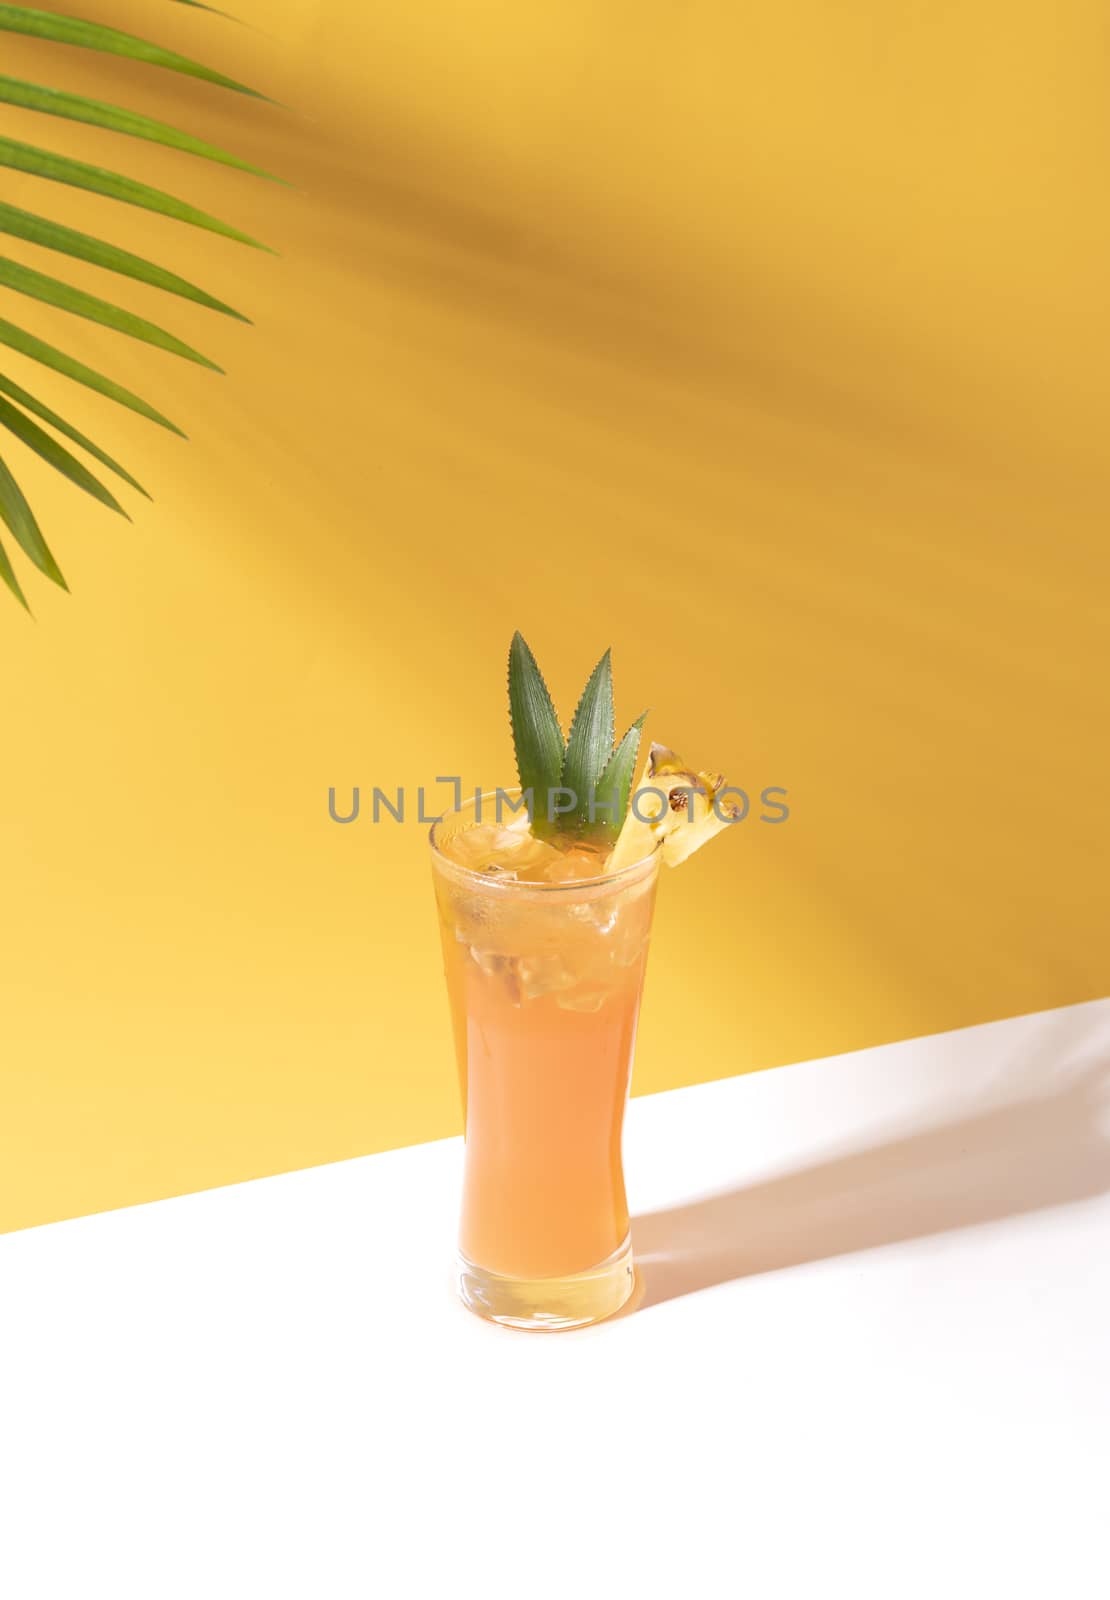 iced pineapple punch cocktail in glass on orange background. summer drink.